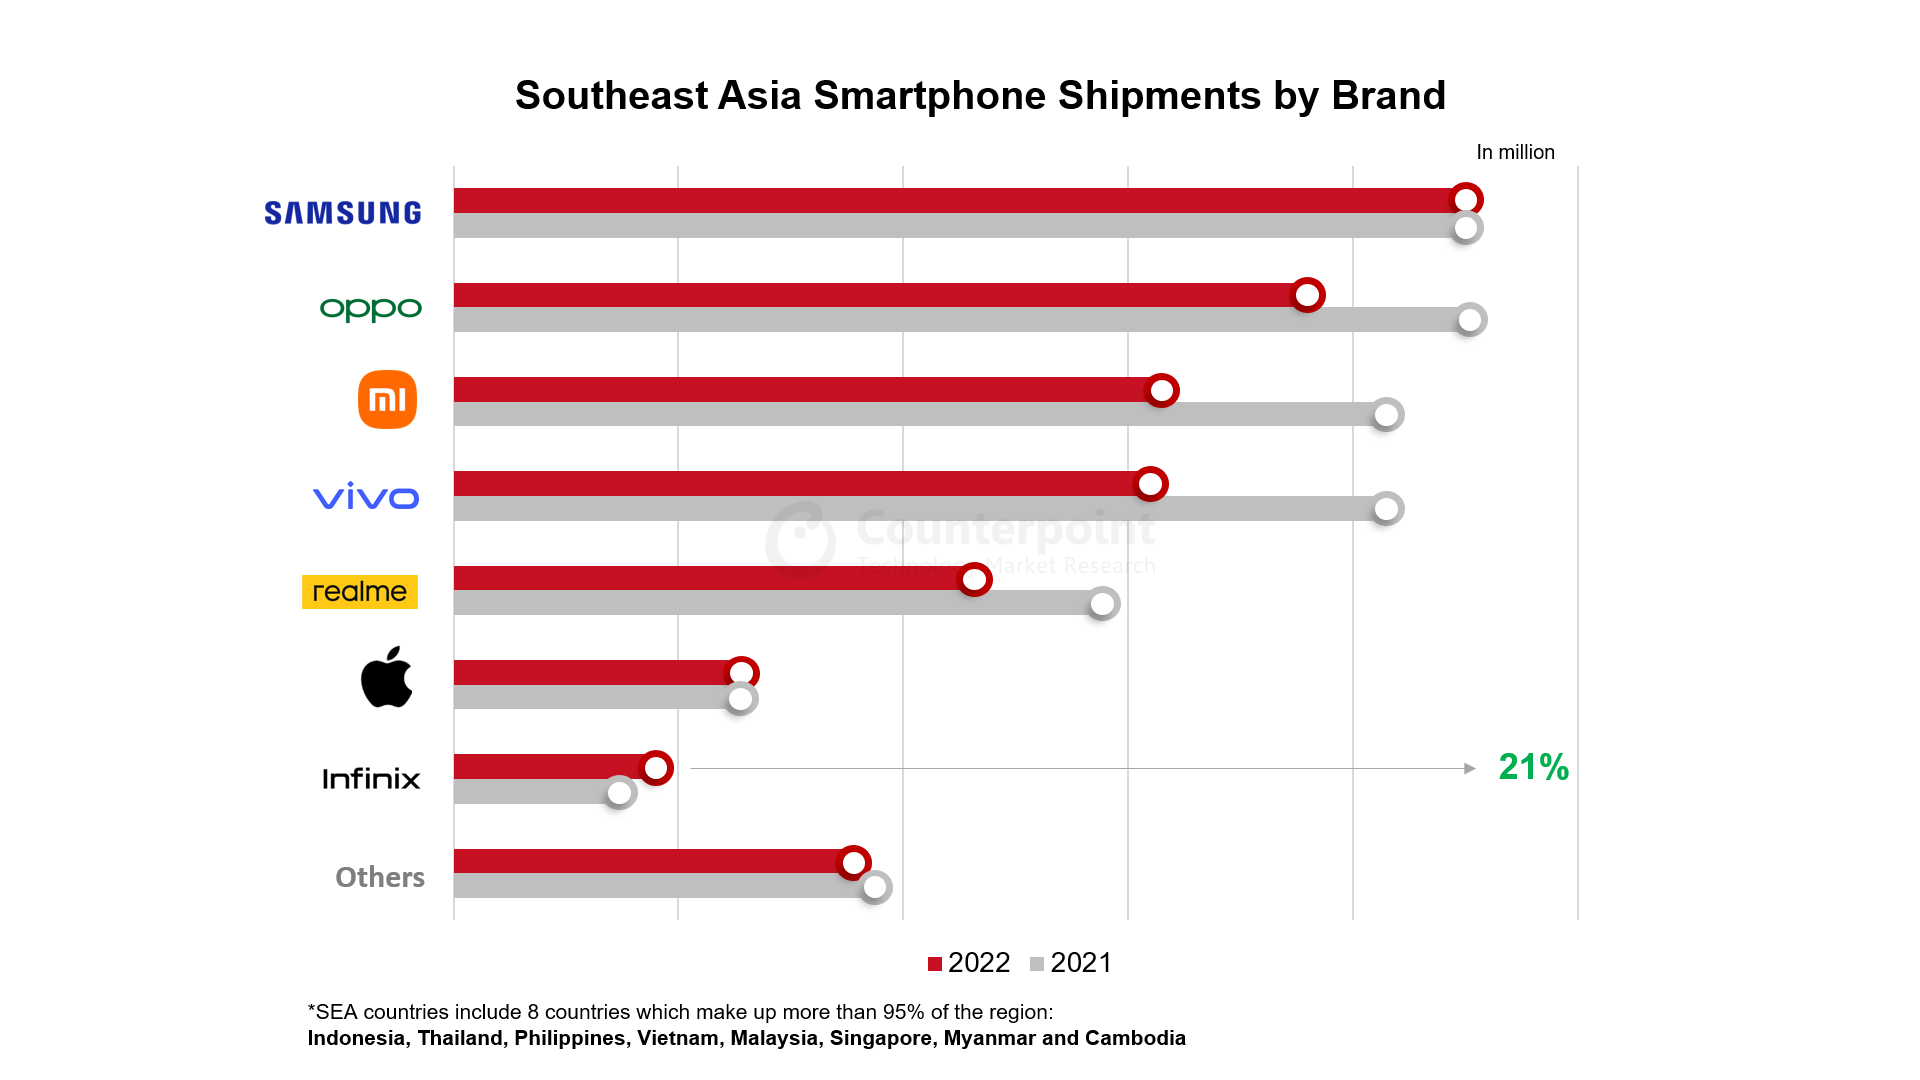 Southeast Asia Smartphone Shipments by Brand